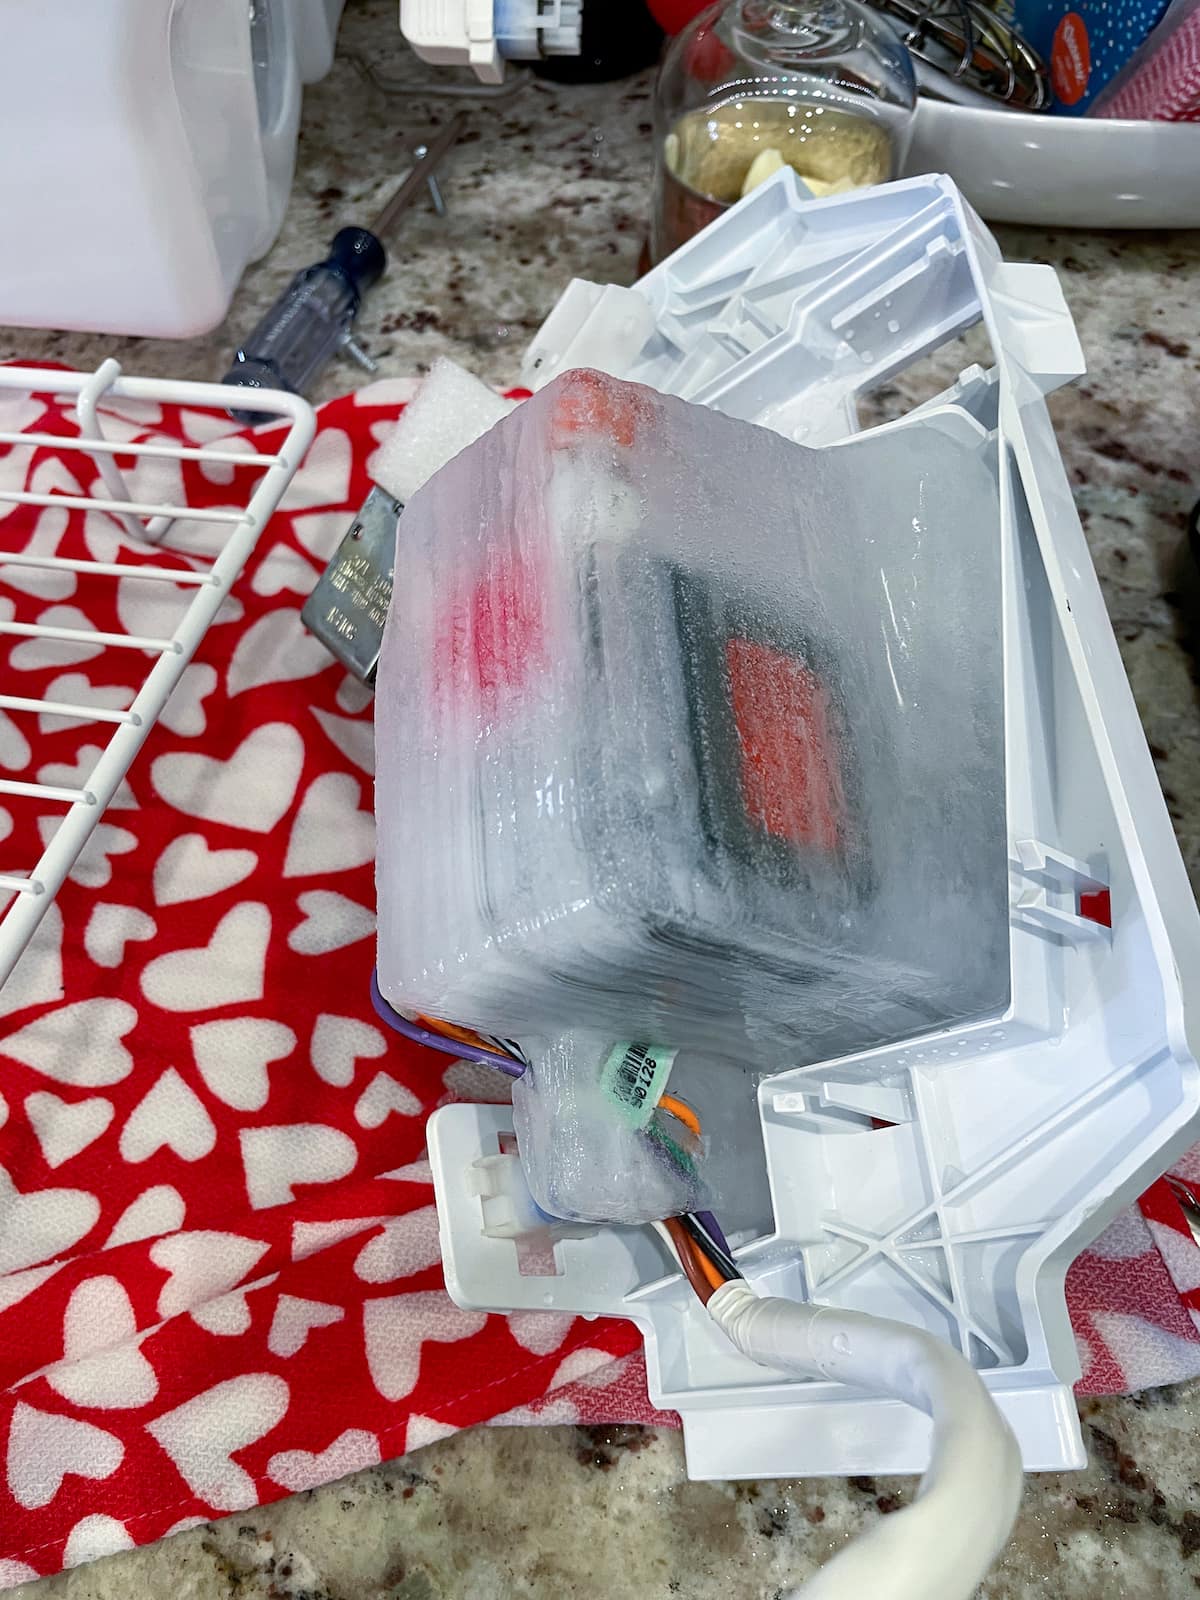 Freezer motor covered with a block of ice